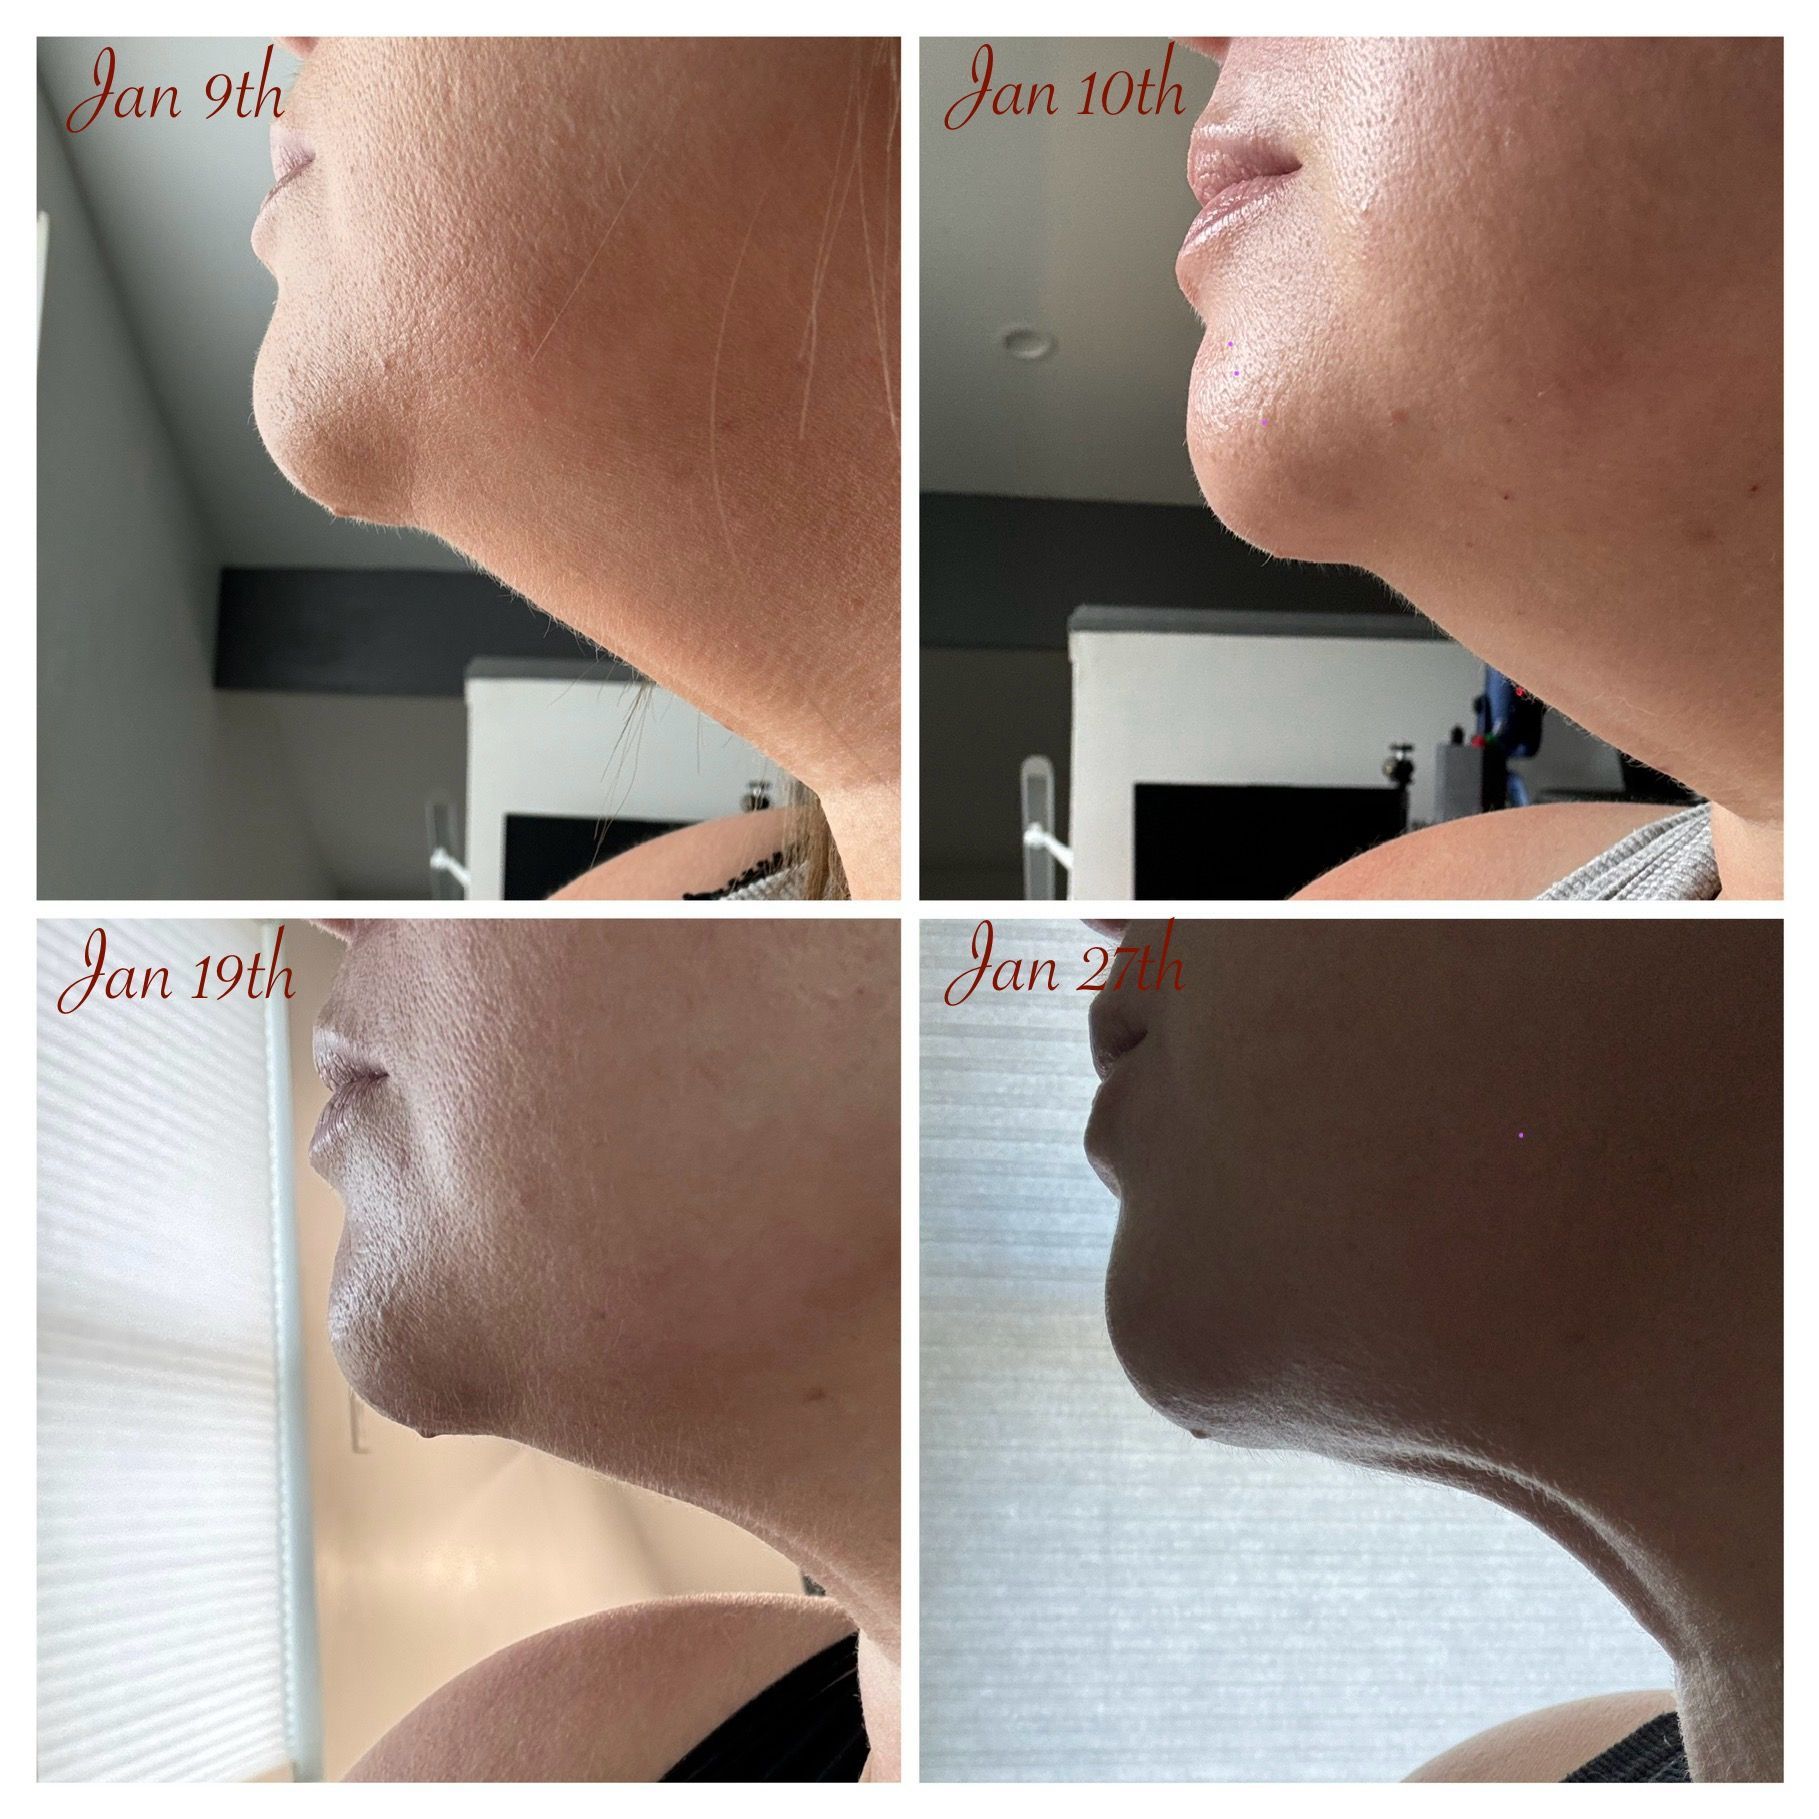 Lipodissolve treatment before and after results. Neck fat loss